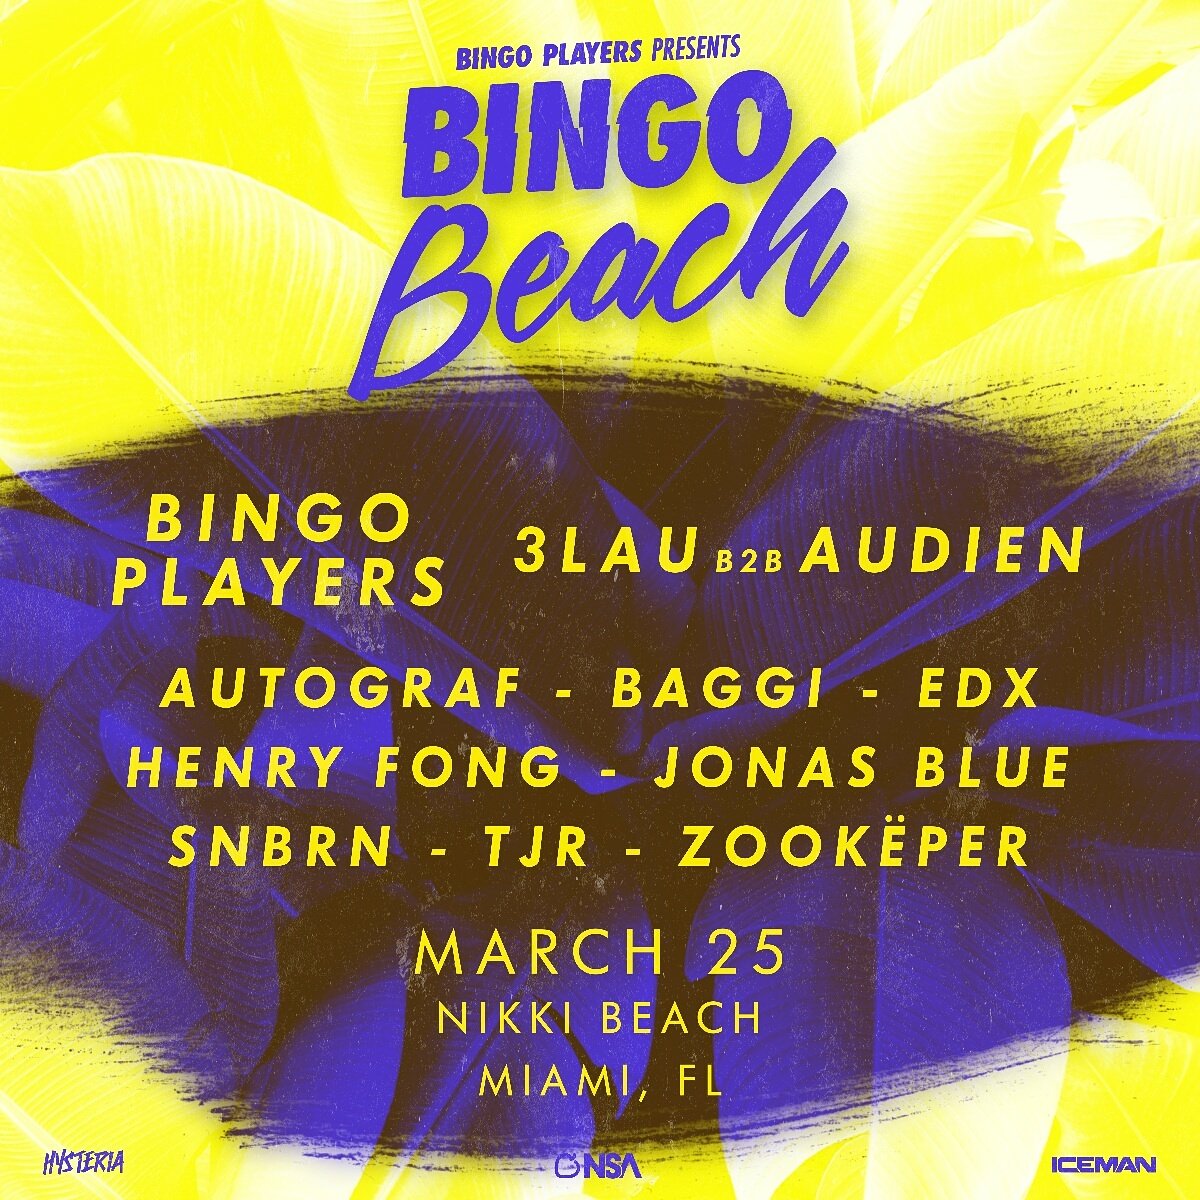 Returning for another round of Bingo Beach Miami this month!   Tix: nsamiami.wantickets.com/Events/218127/… https://t.co/RxQsZWJhbo